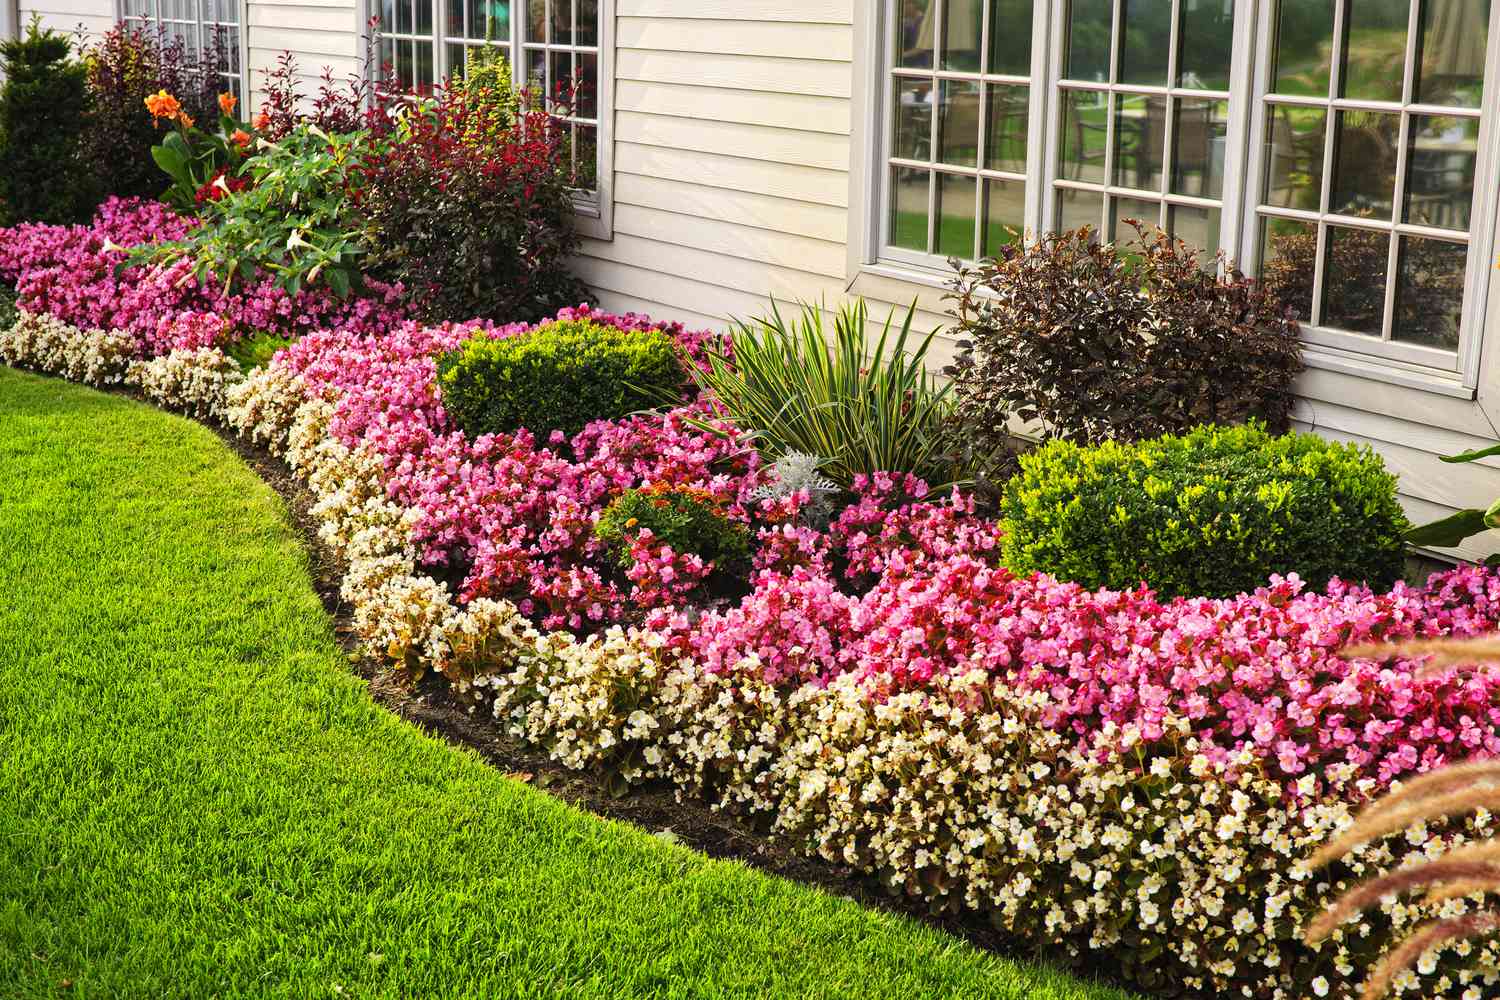 Unique Lawn-Edging Ideas to Totally Transform Your Yard